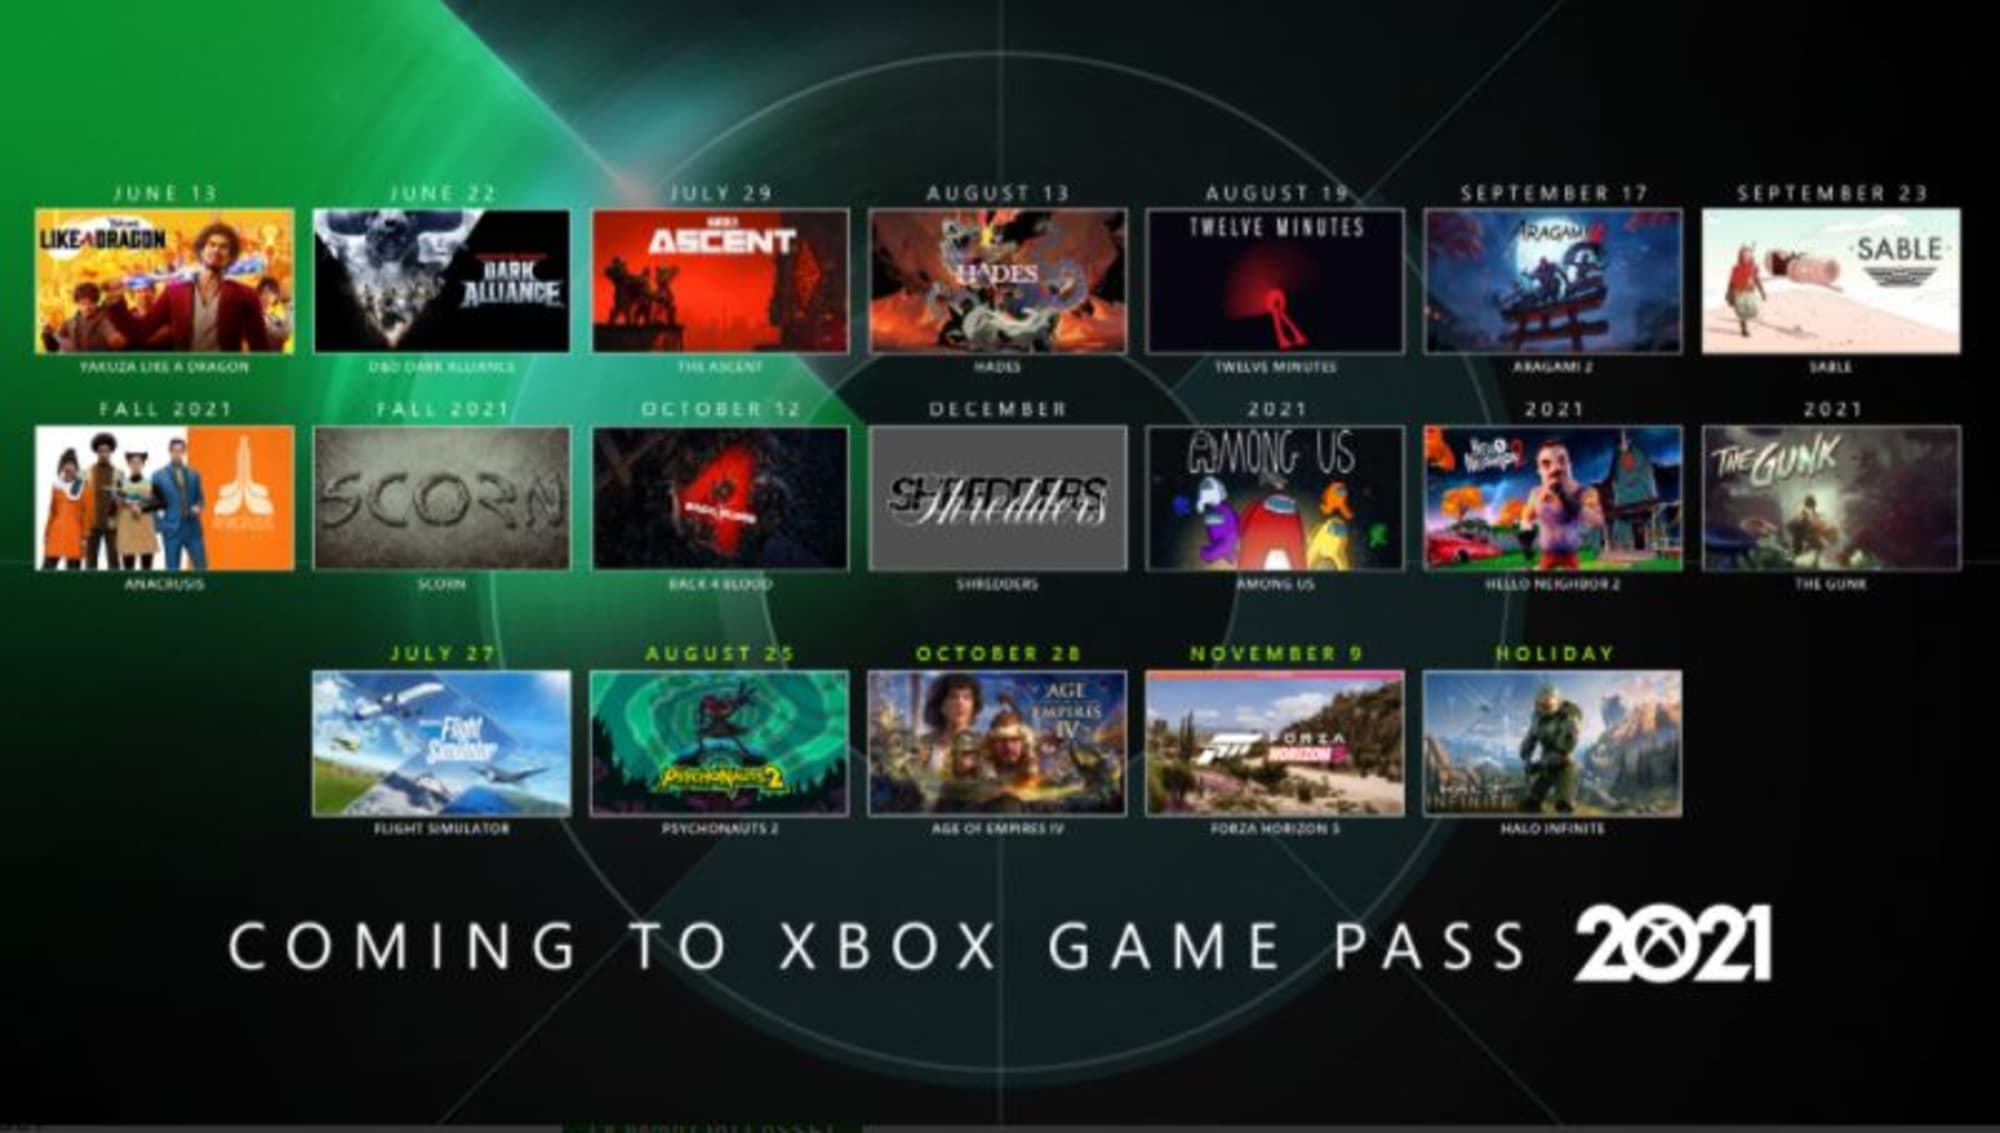 xbox game pass games list 2020